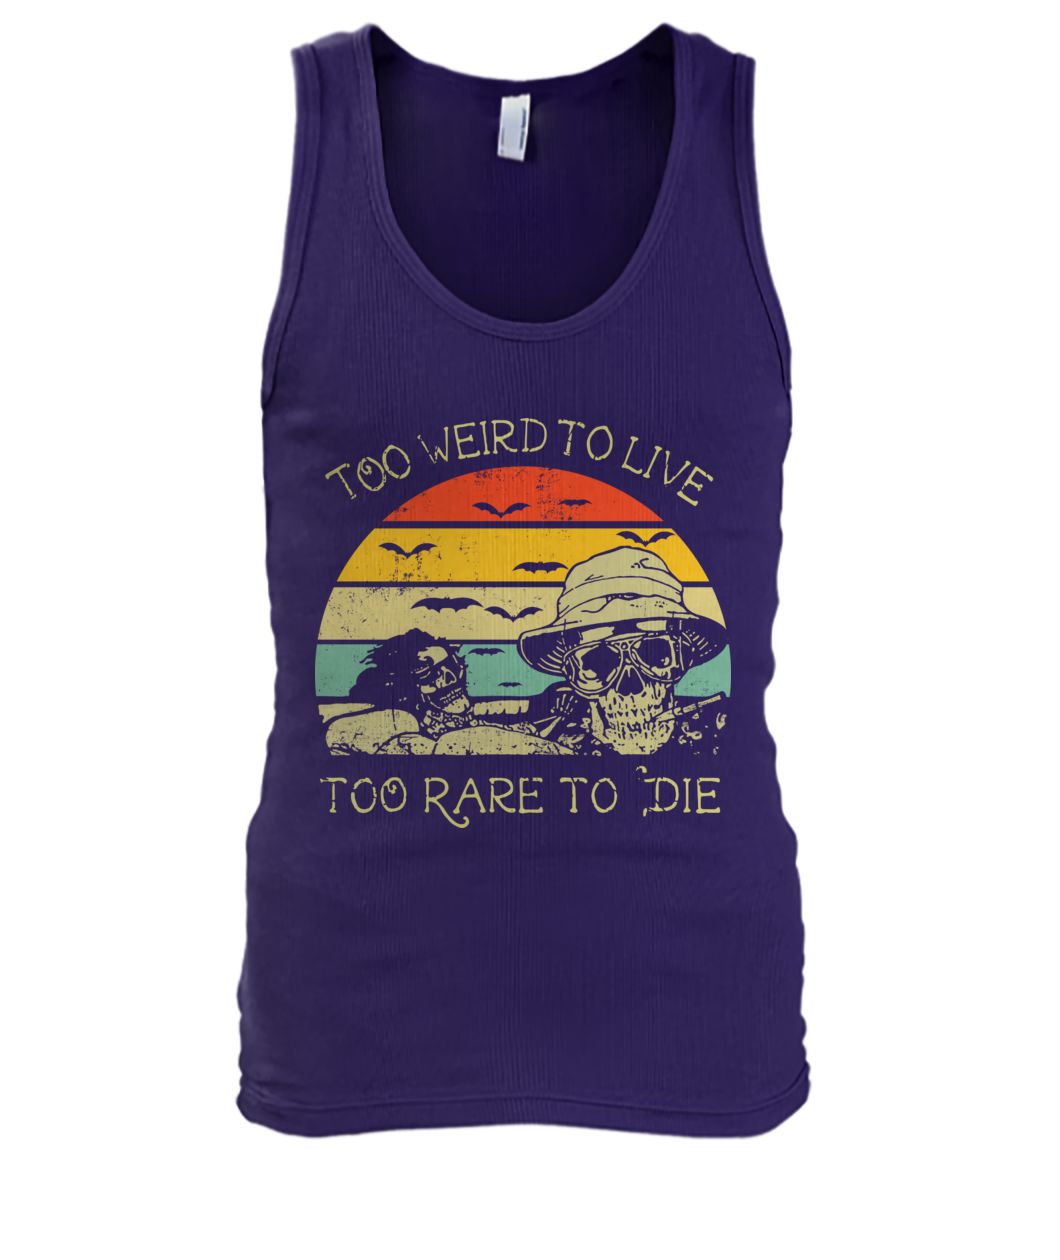 Vintage too weird to live to rare to die men's tank top